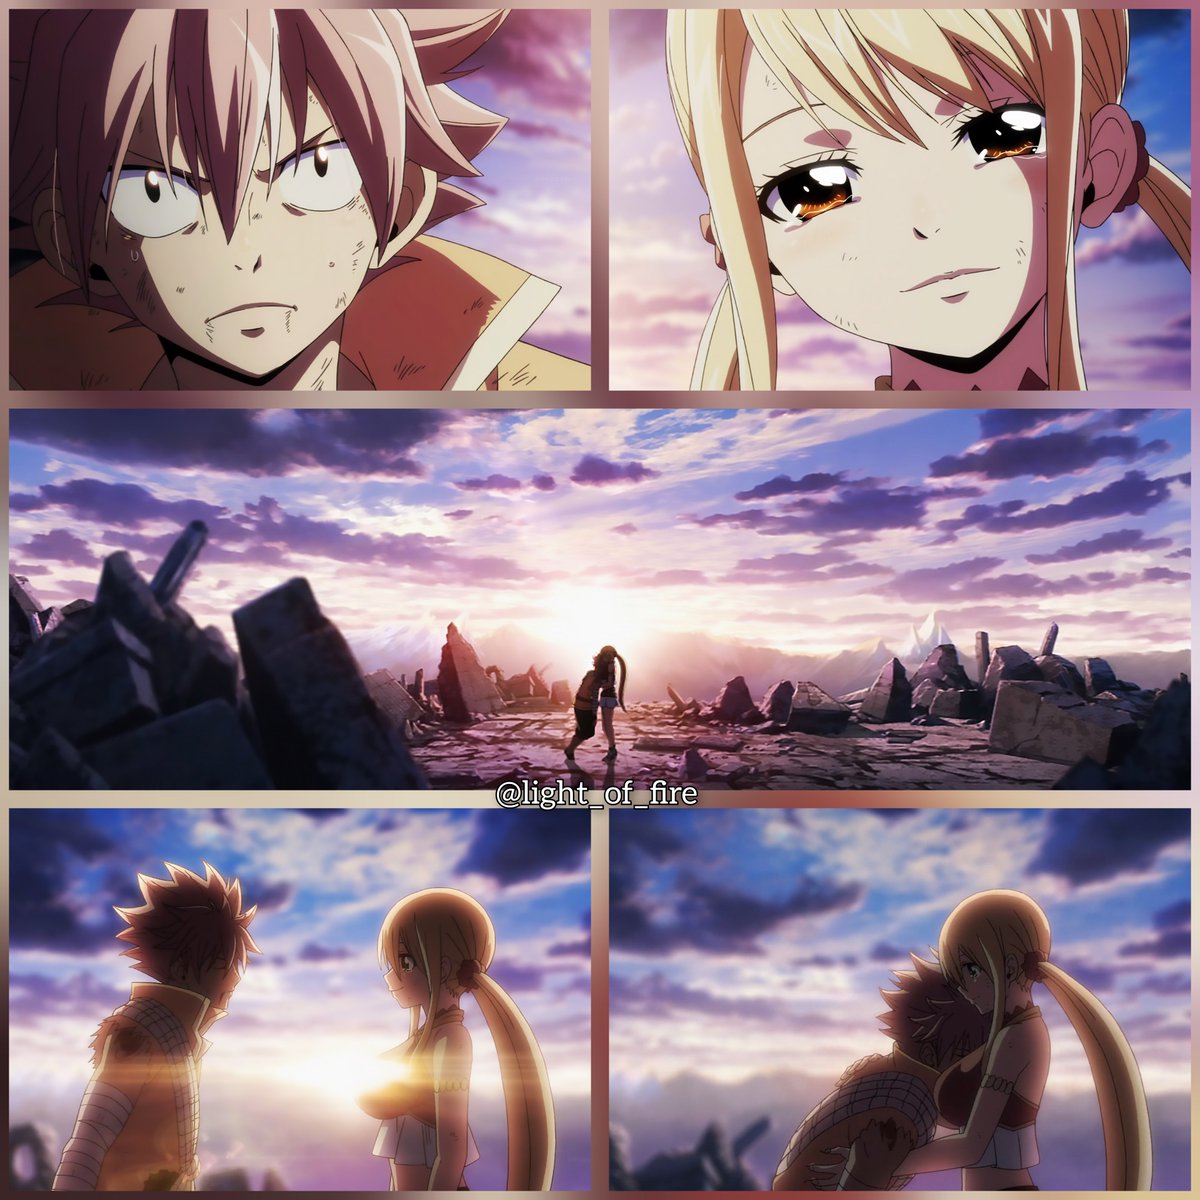 the most beautiful NaLu moment imo 💞
#FairyTail